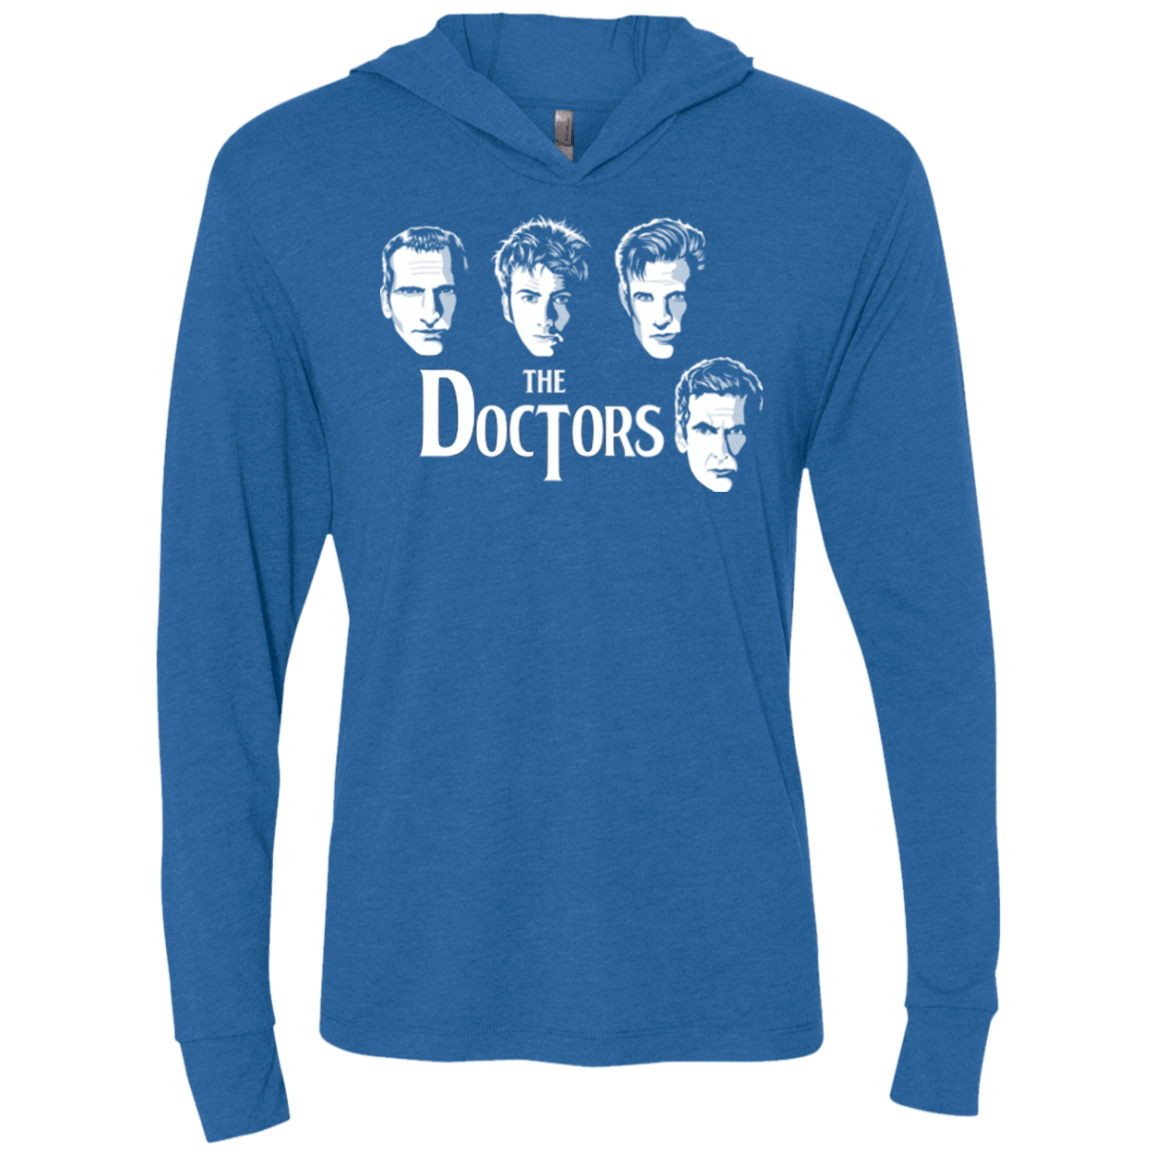 T-Shirts Vintage Royal / X-Small The Doctors Triblend Long Sleeve Hoodie Tee